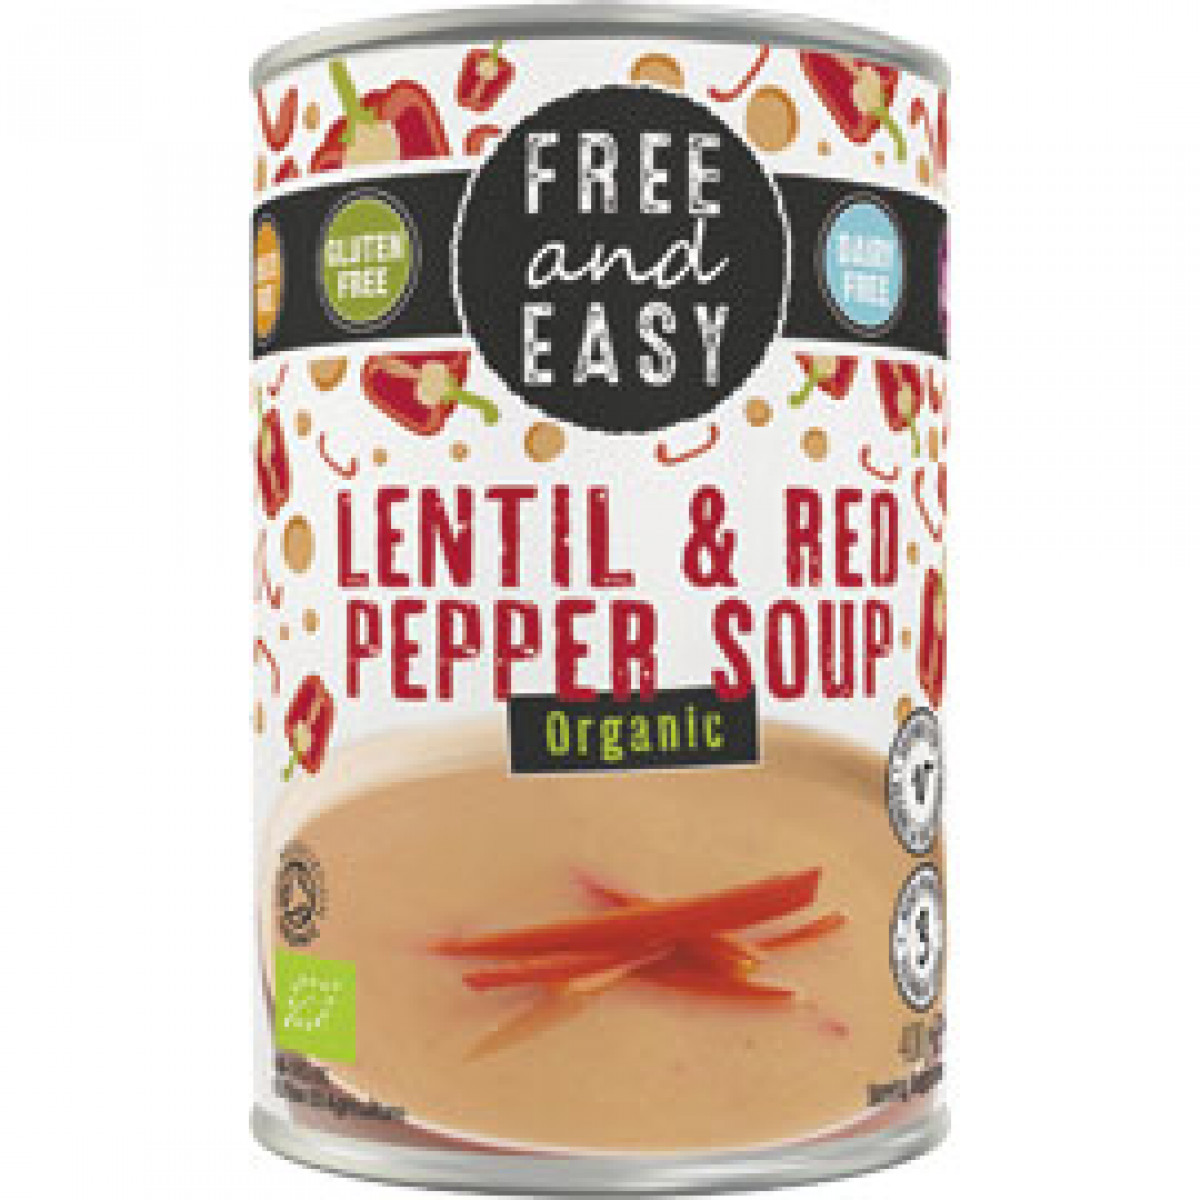 Product picture for Soup - Lentil & Red Pepper